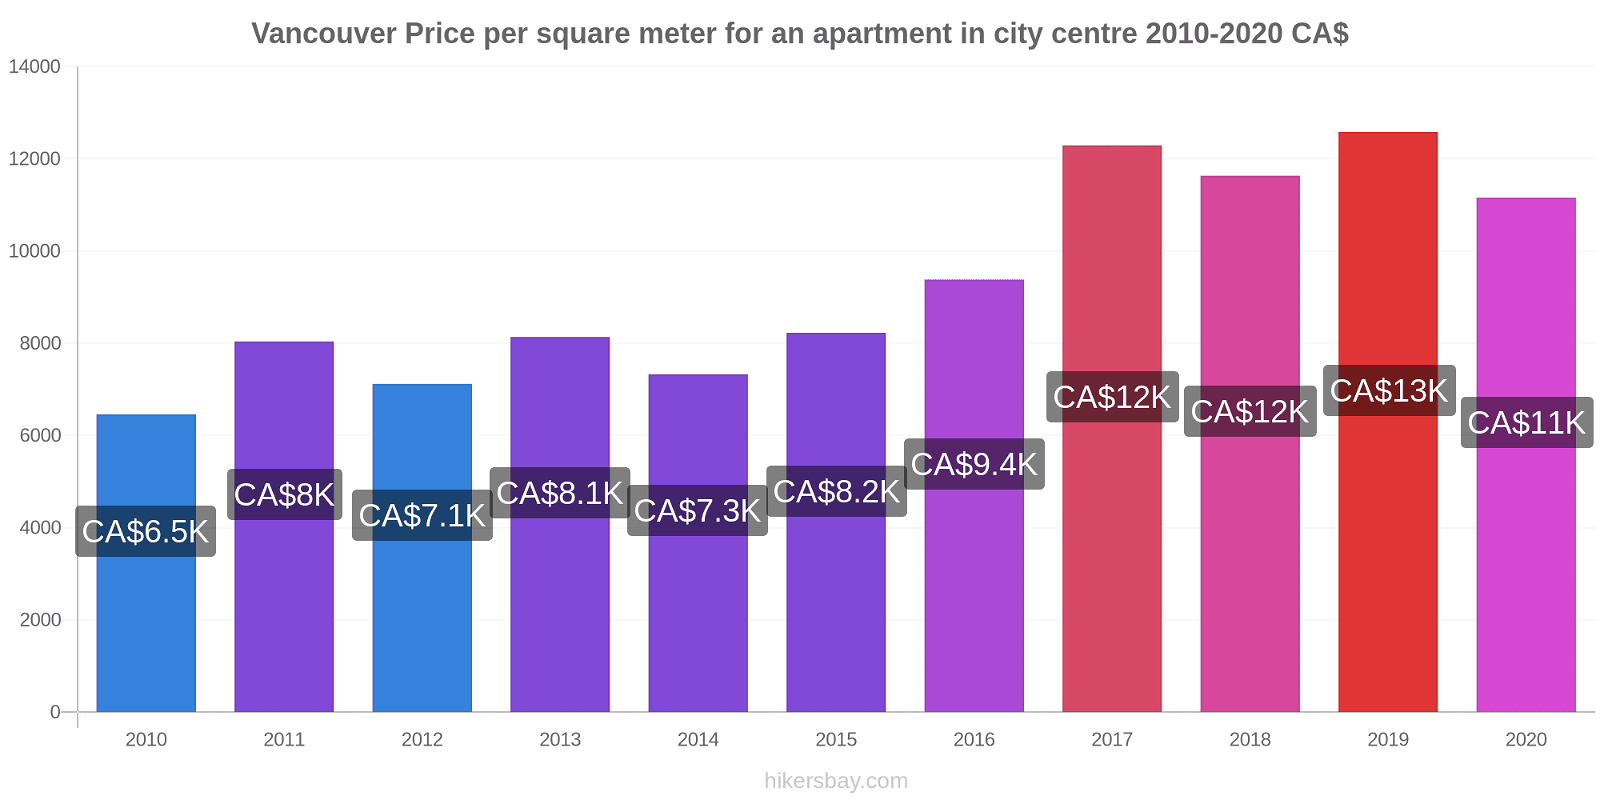 Vancouver price changes Price per square meter for an apartment in city centre hikersbay.com